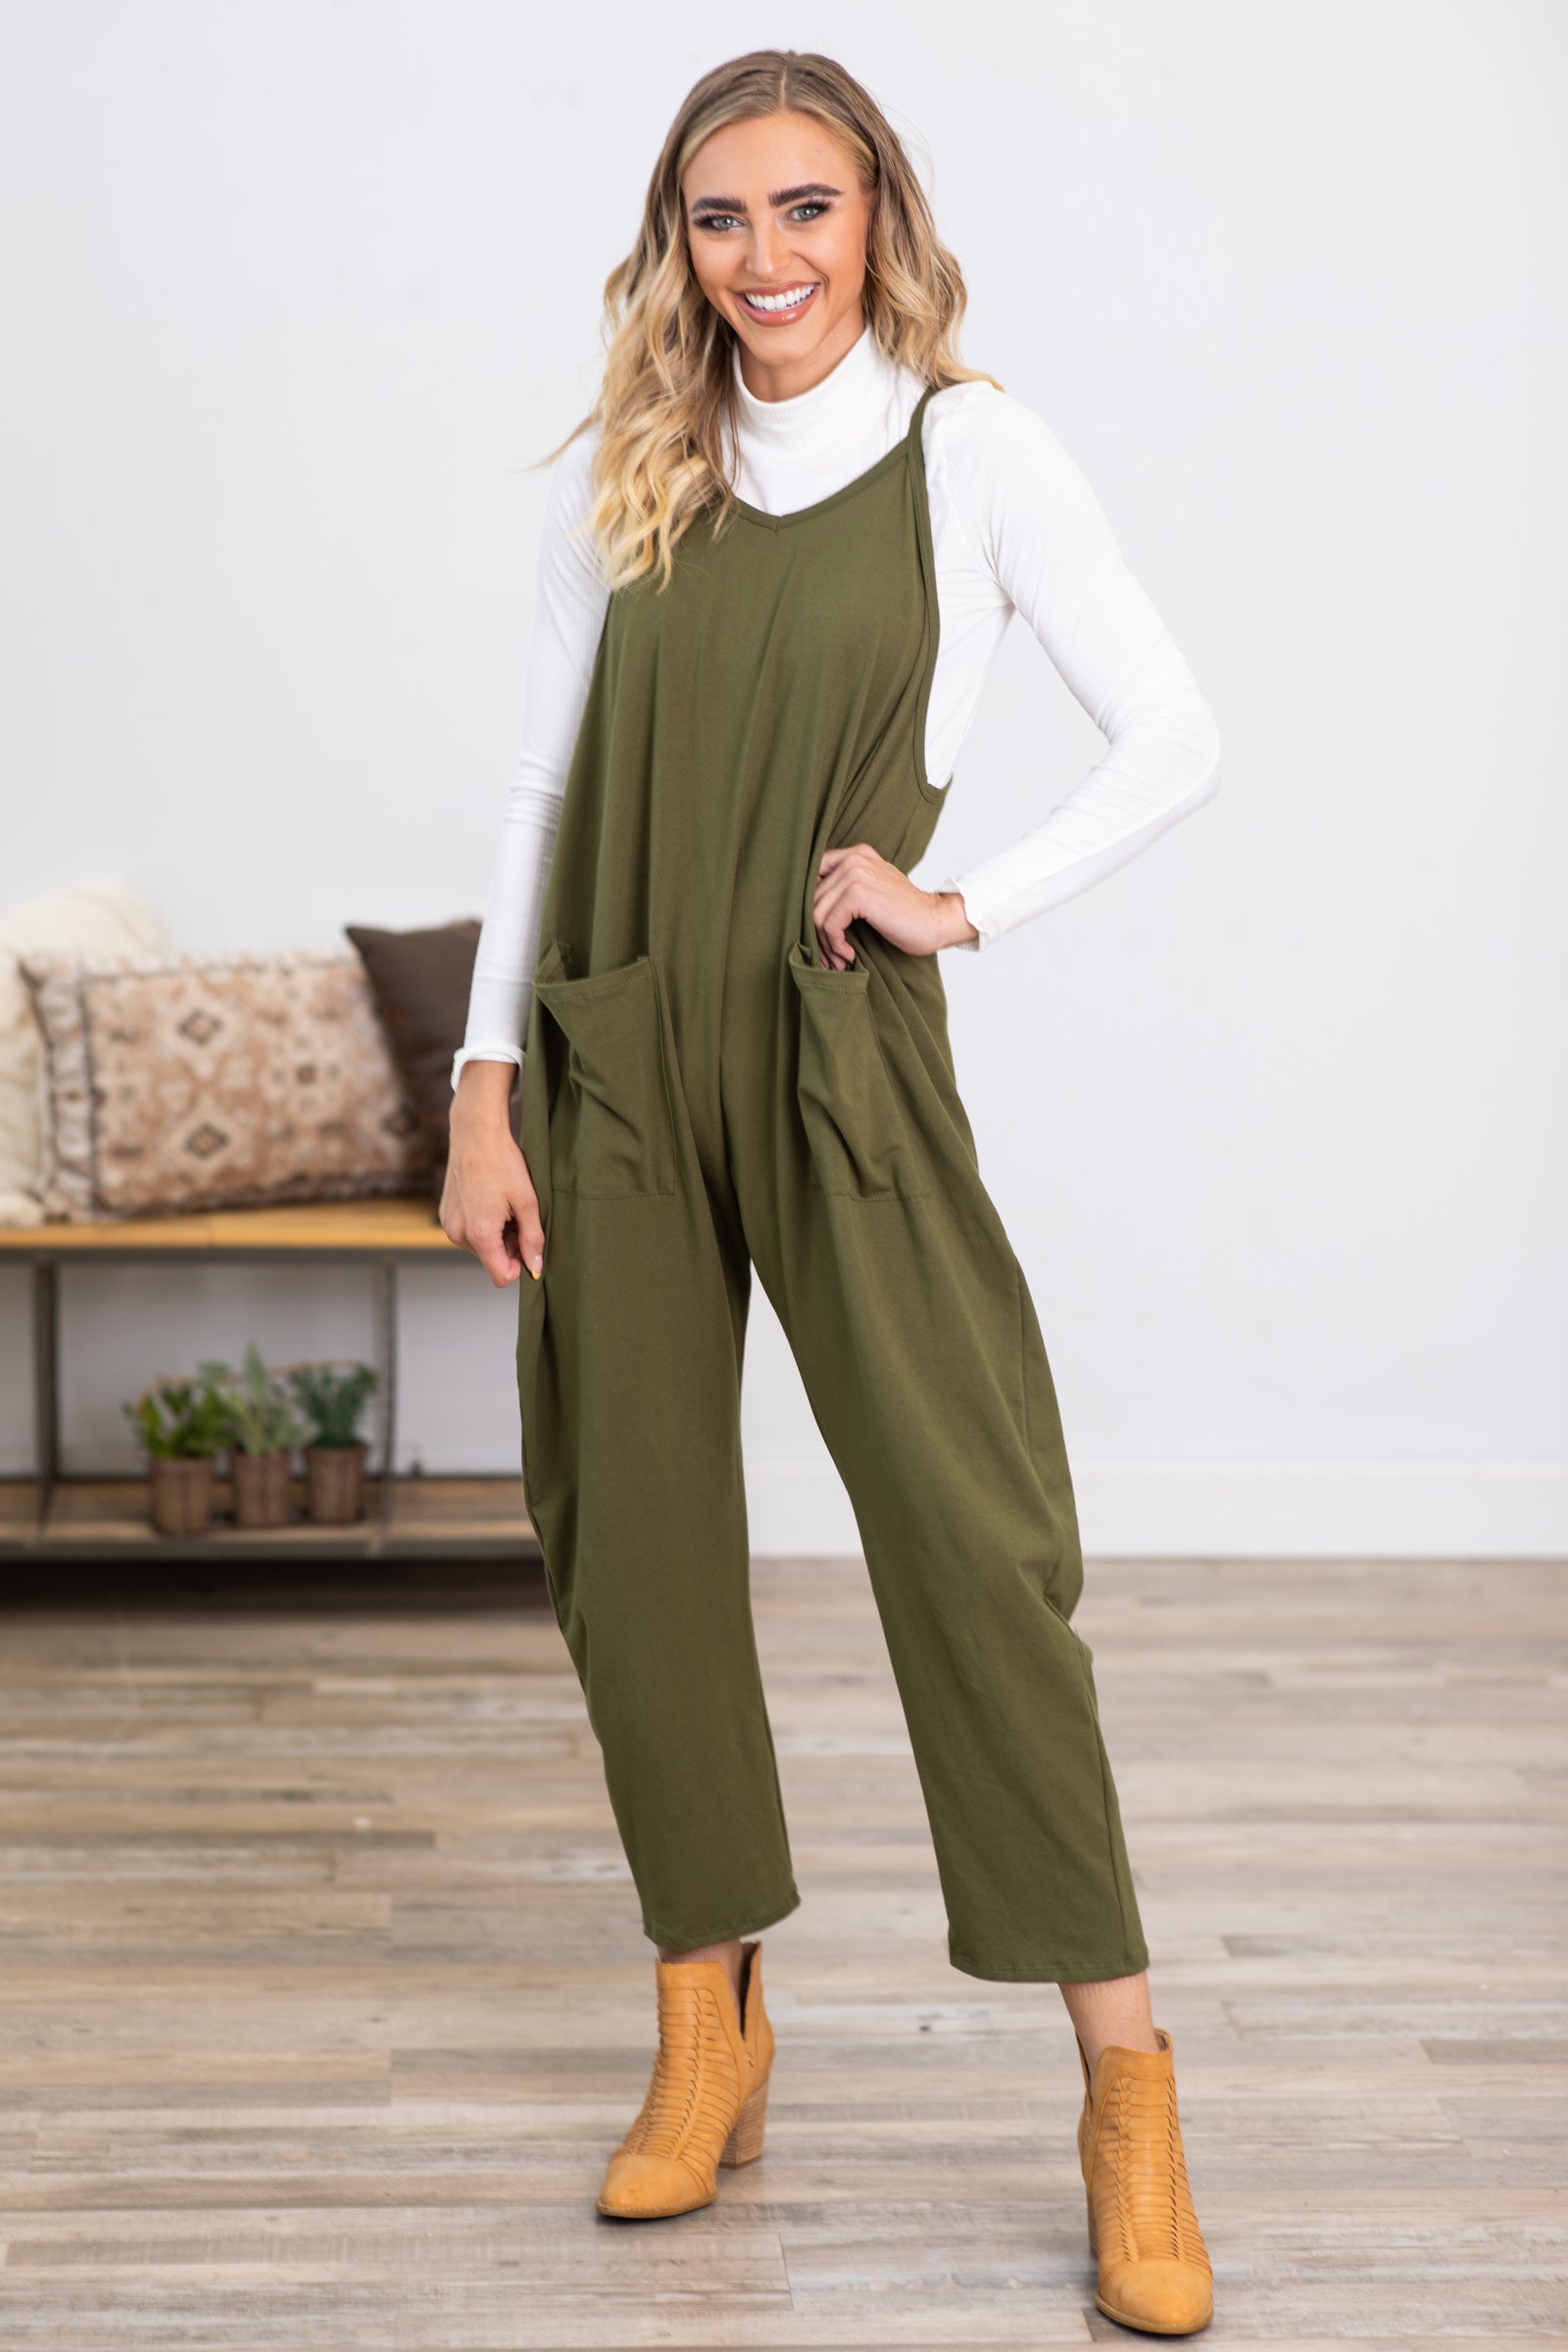 Women's Jumpsuits & Playsuits | Sizes 8-32 | Simply Be